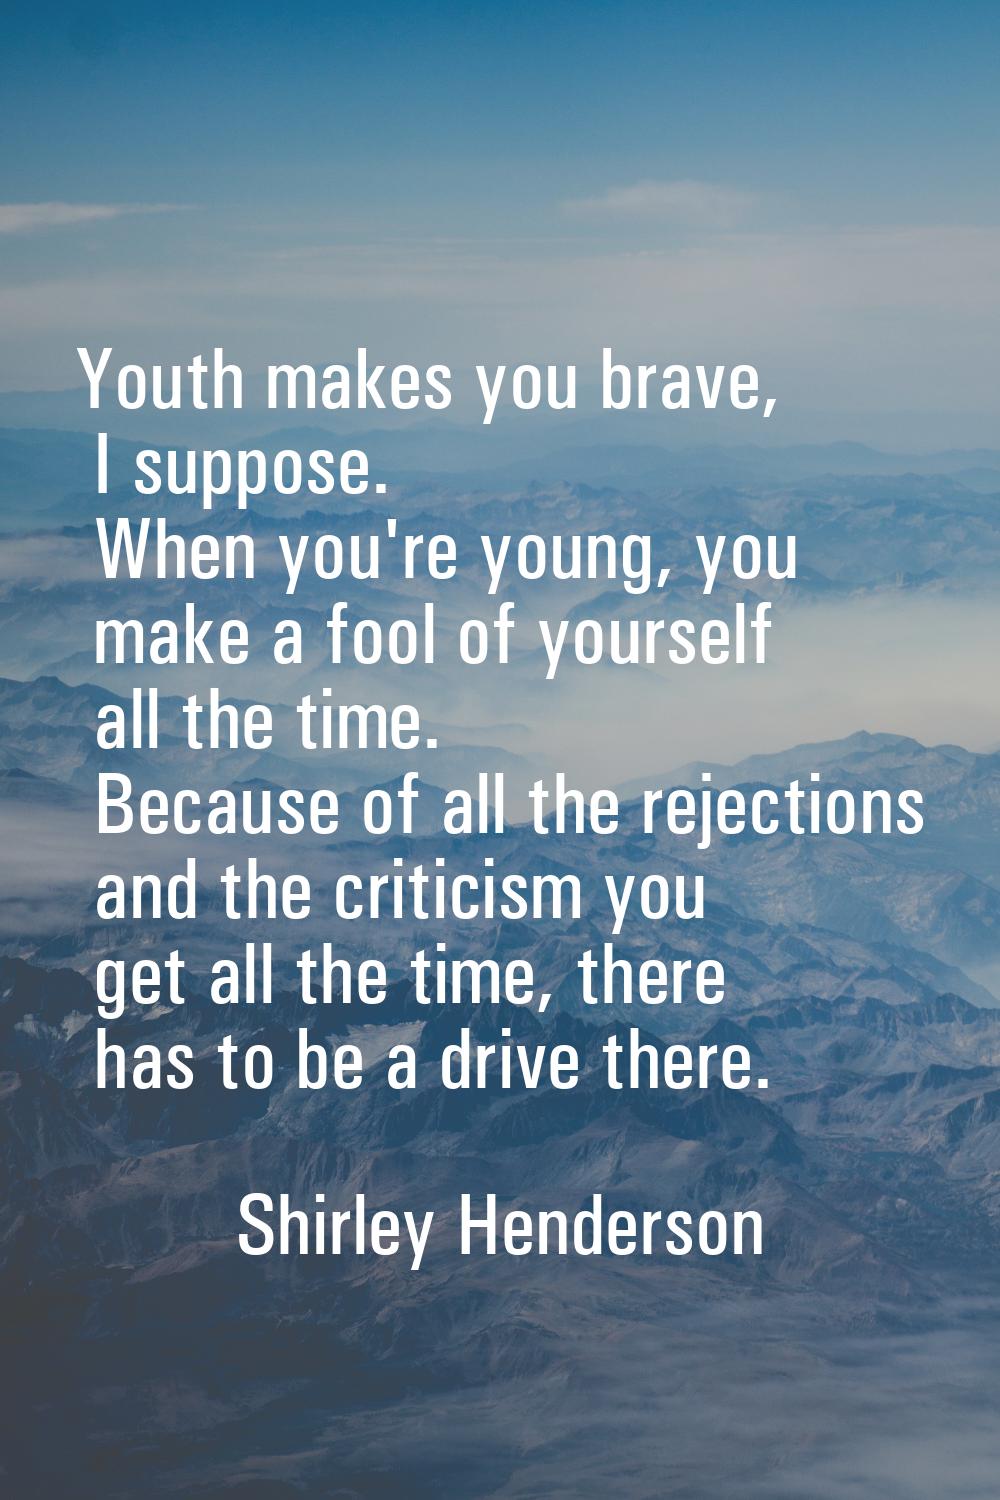 Youth makes you brave, I suppose. When you're young, you make a fool of yourself all the time. Beca